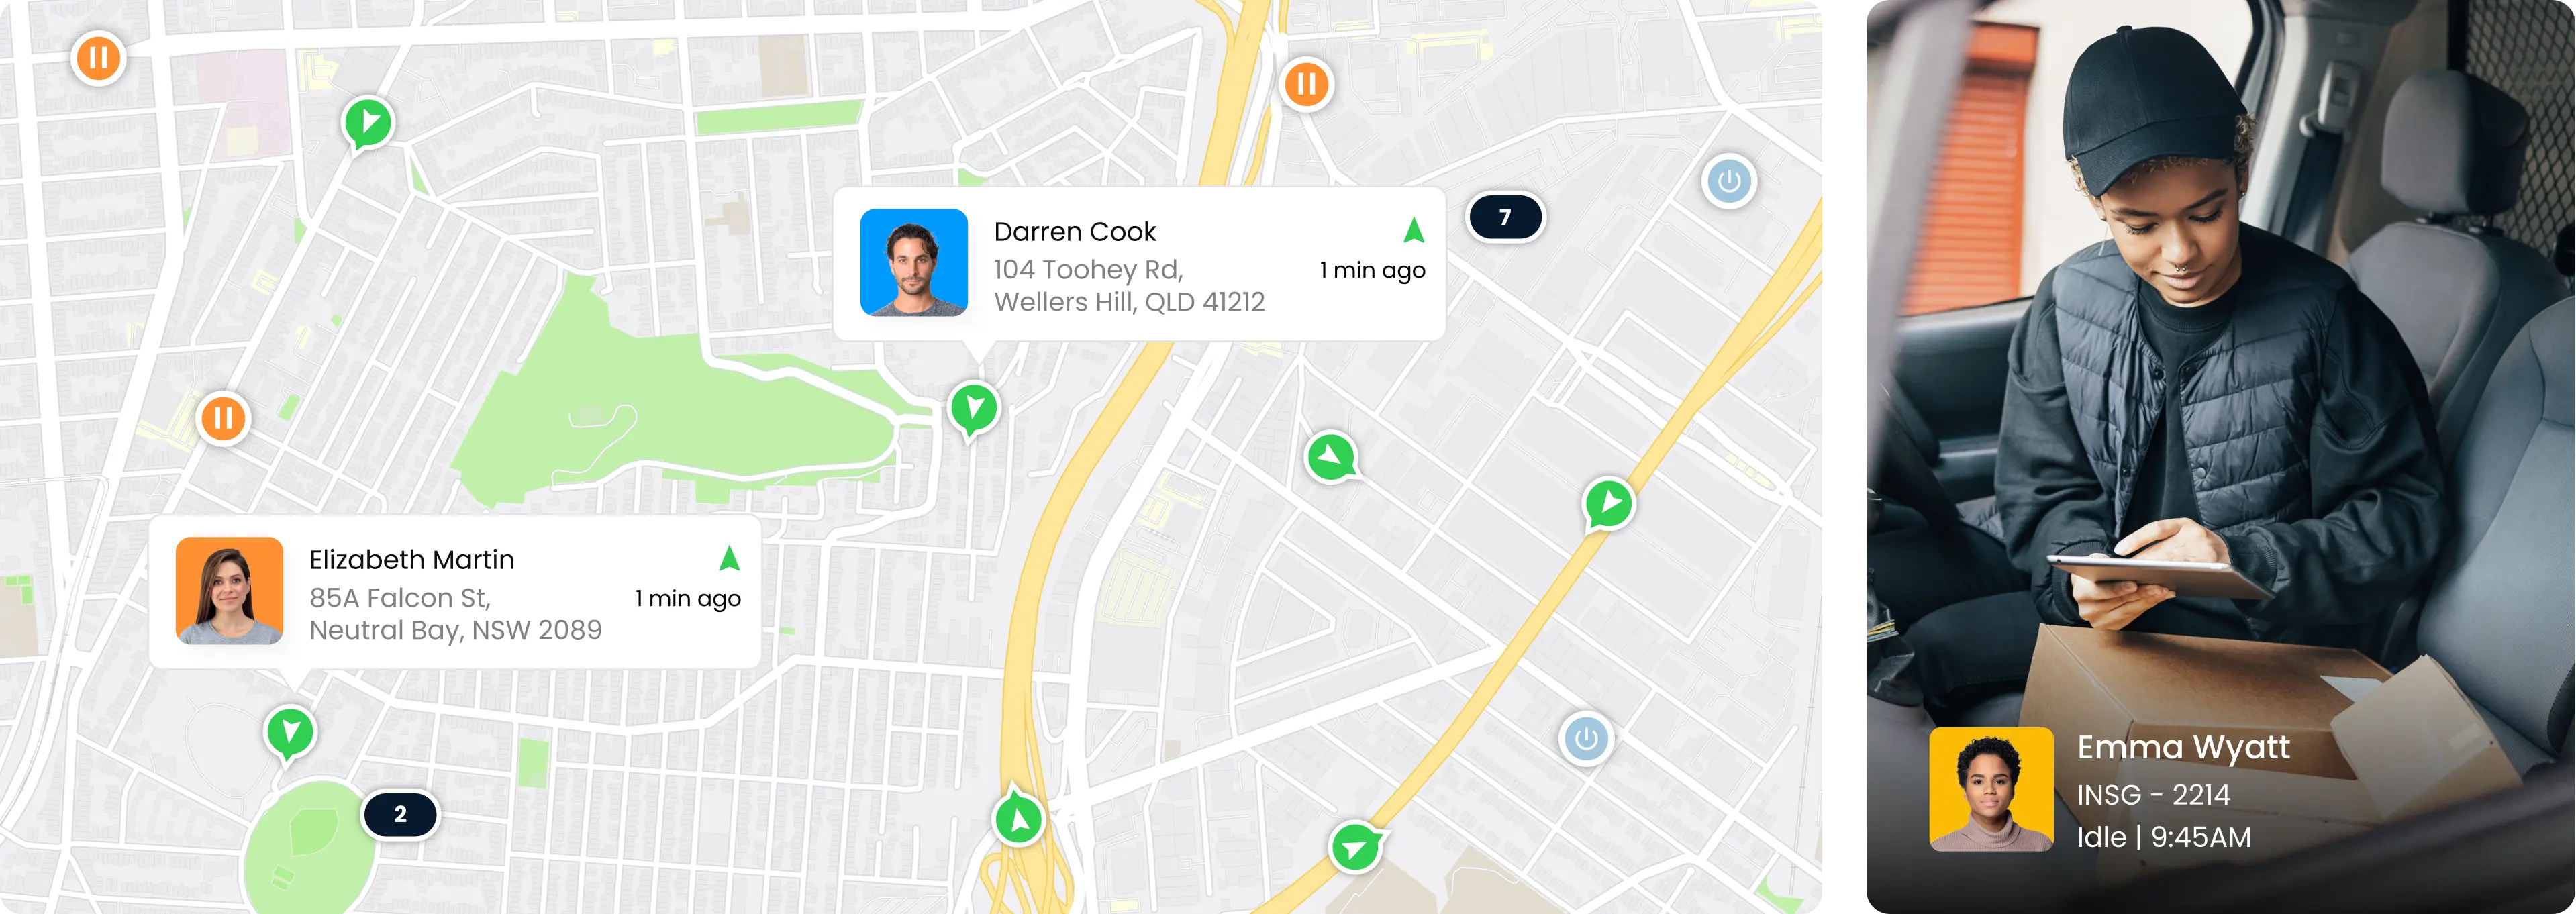 Bird's eye view of Inseego's fleet tracking software showing the location of drivers.